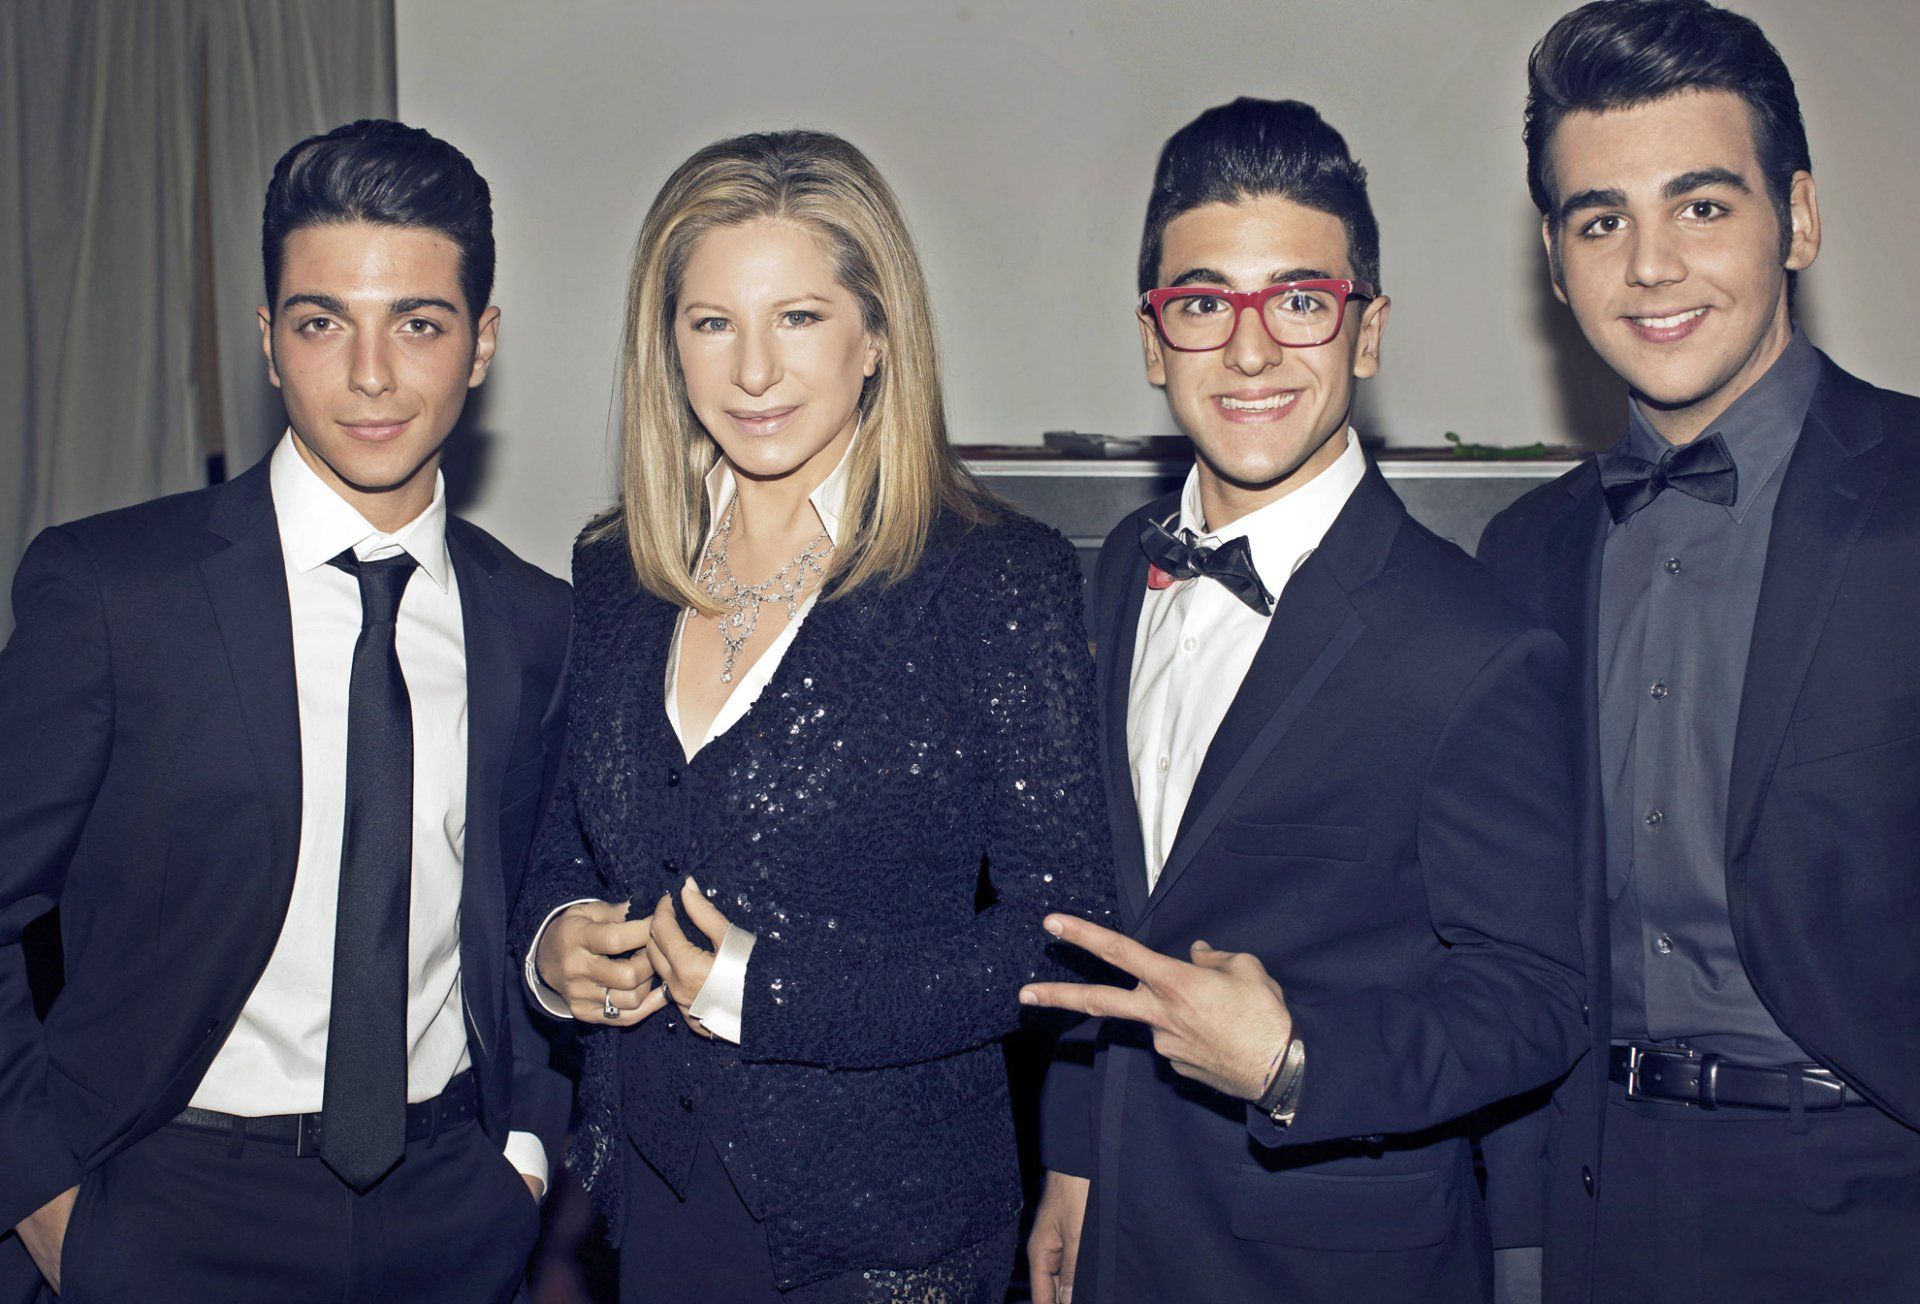 Streisand poses with the group Il Volo.  Photo by: Russell James